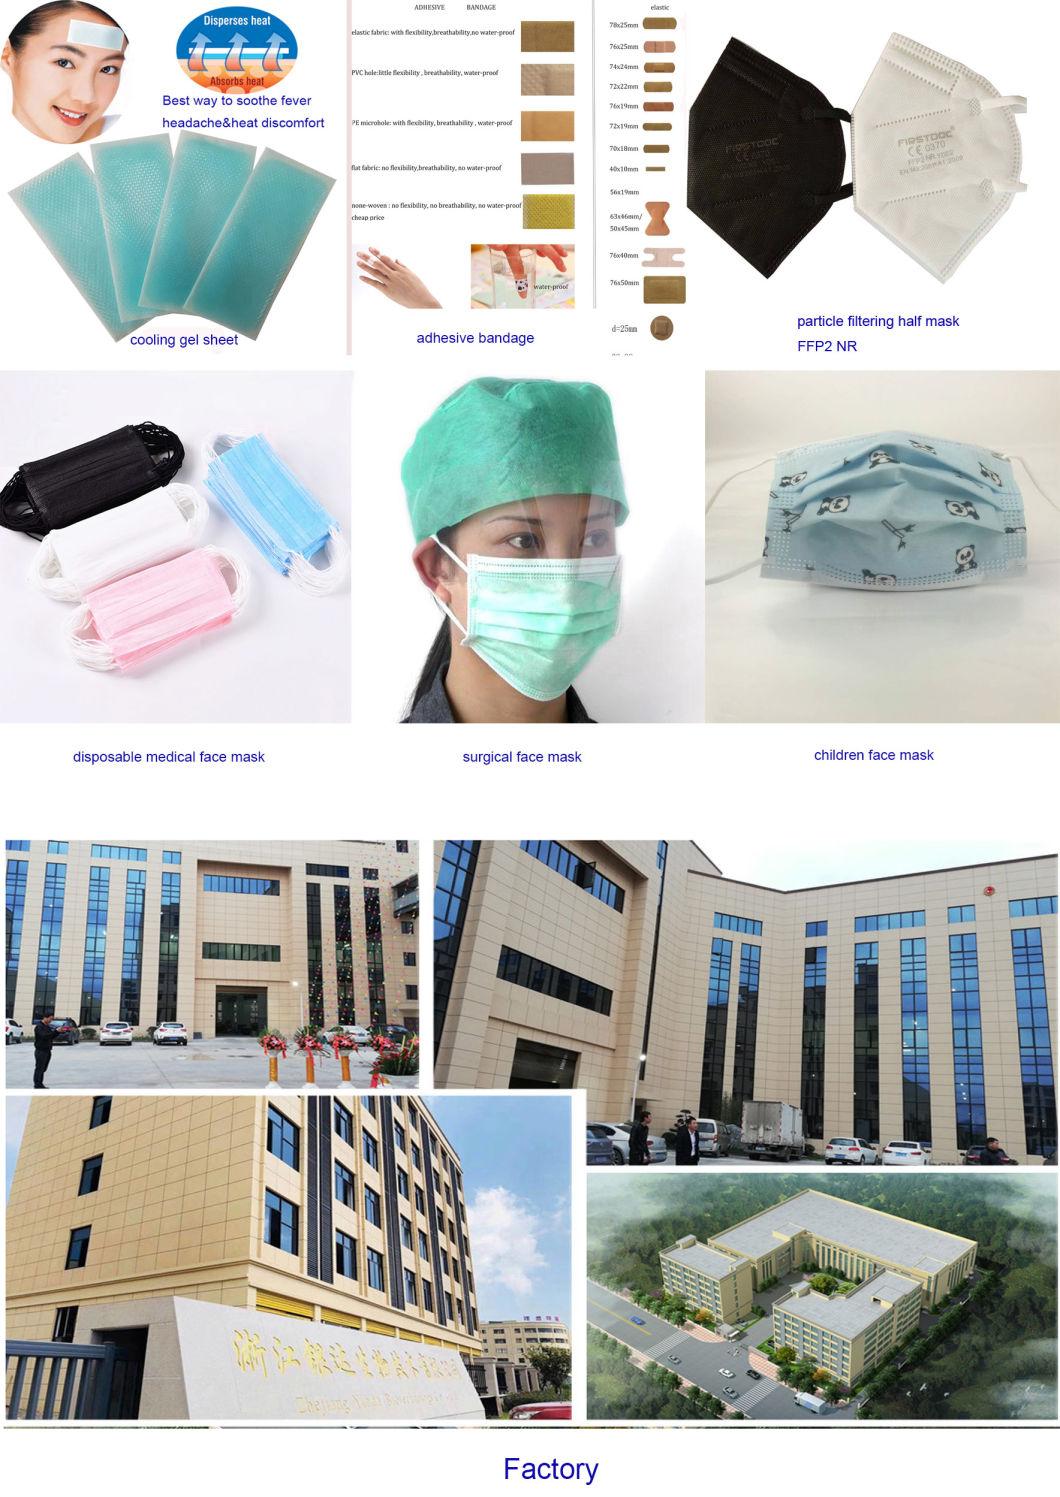 High Quality OEM 40*10mm PVC Material Skin Color Adhesive Bandages